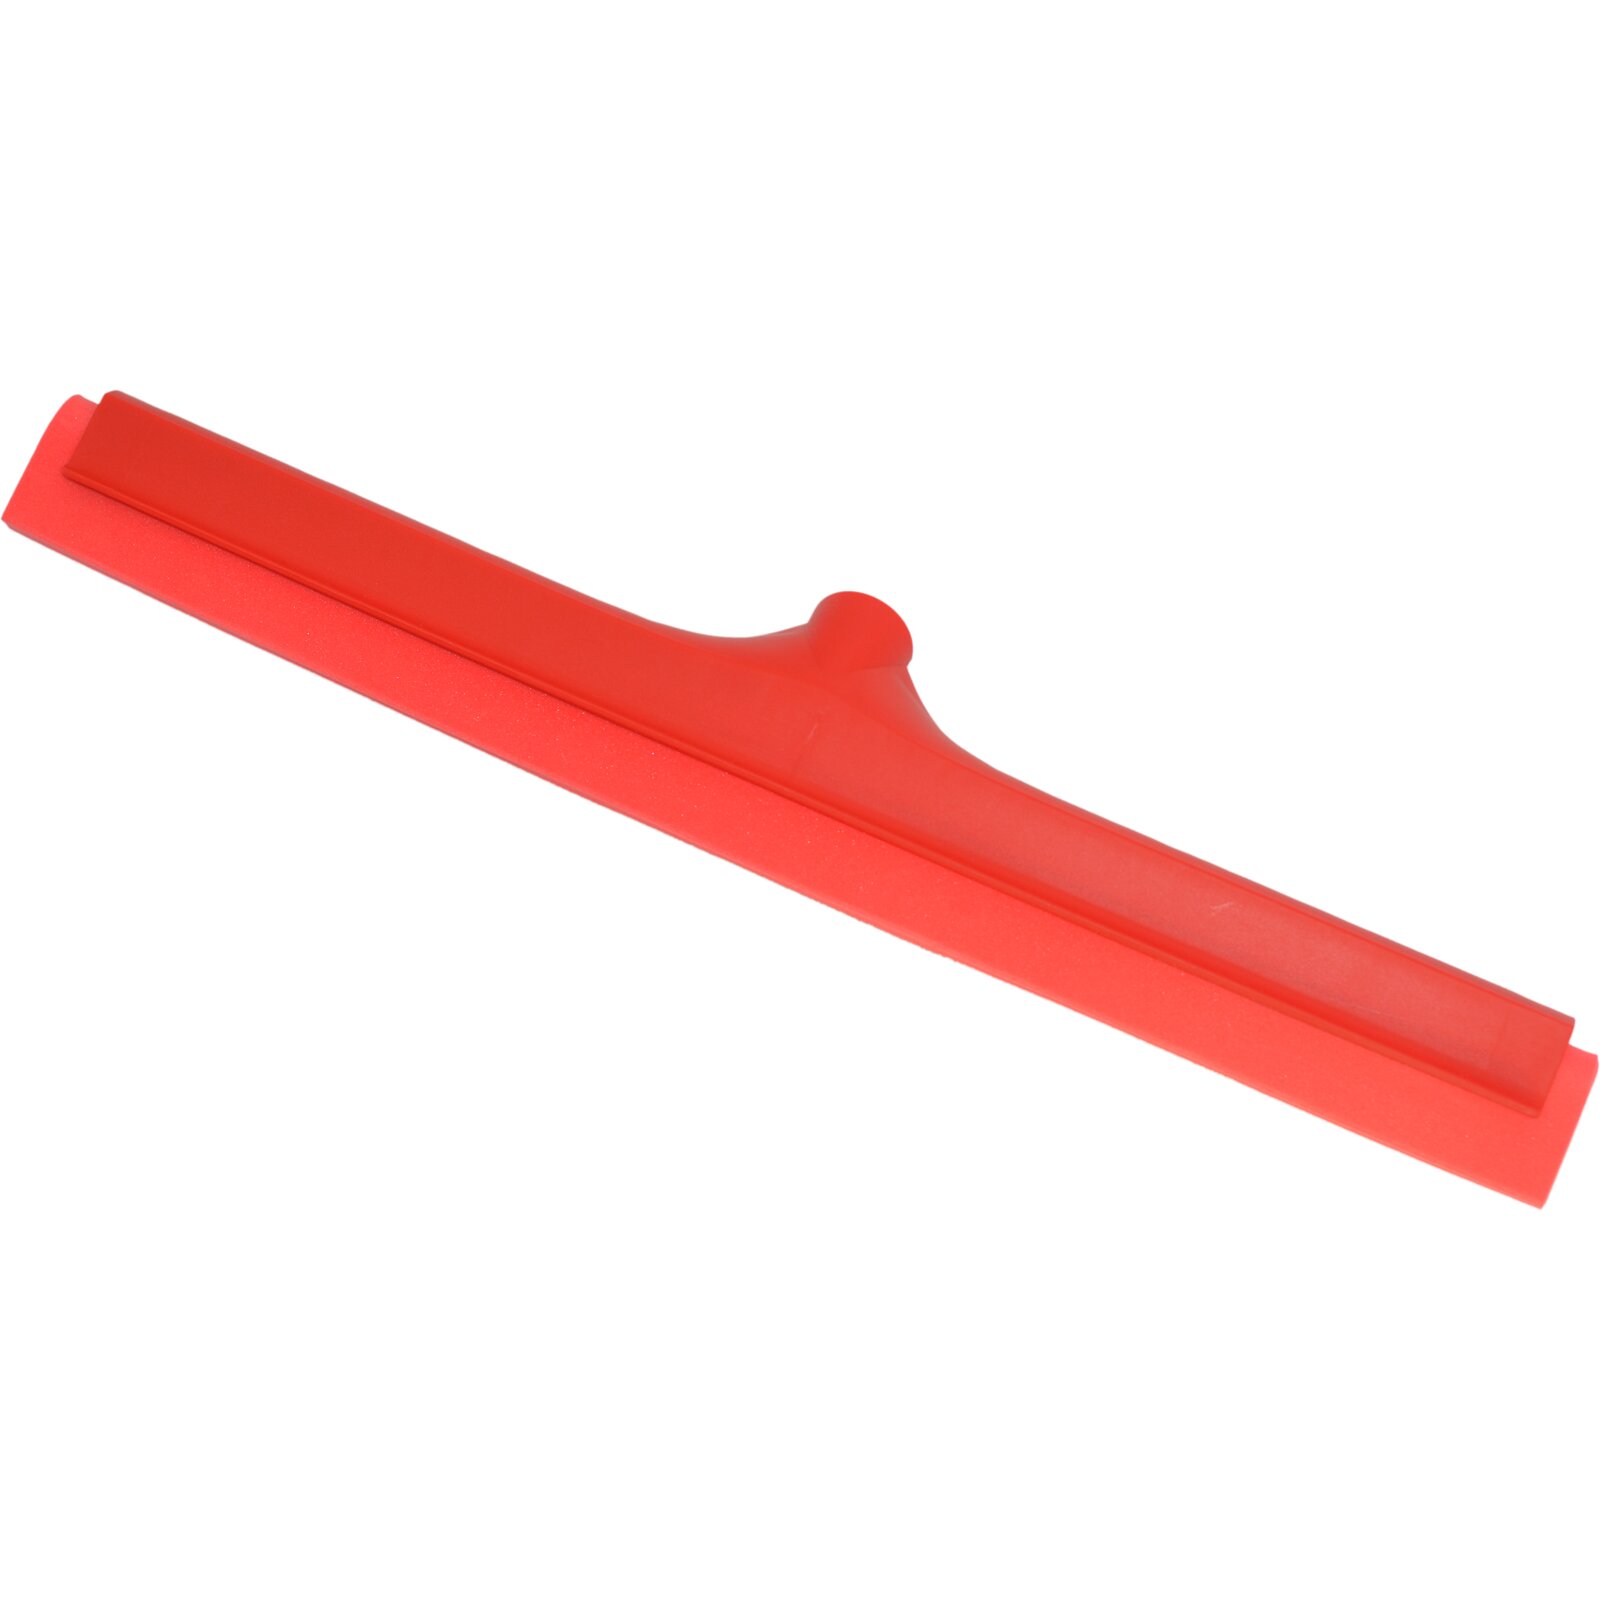 The Titan Squeegee GT1042 Red